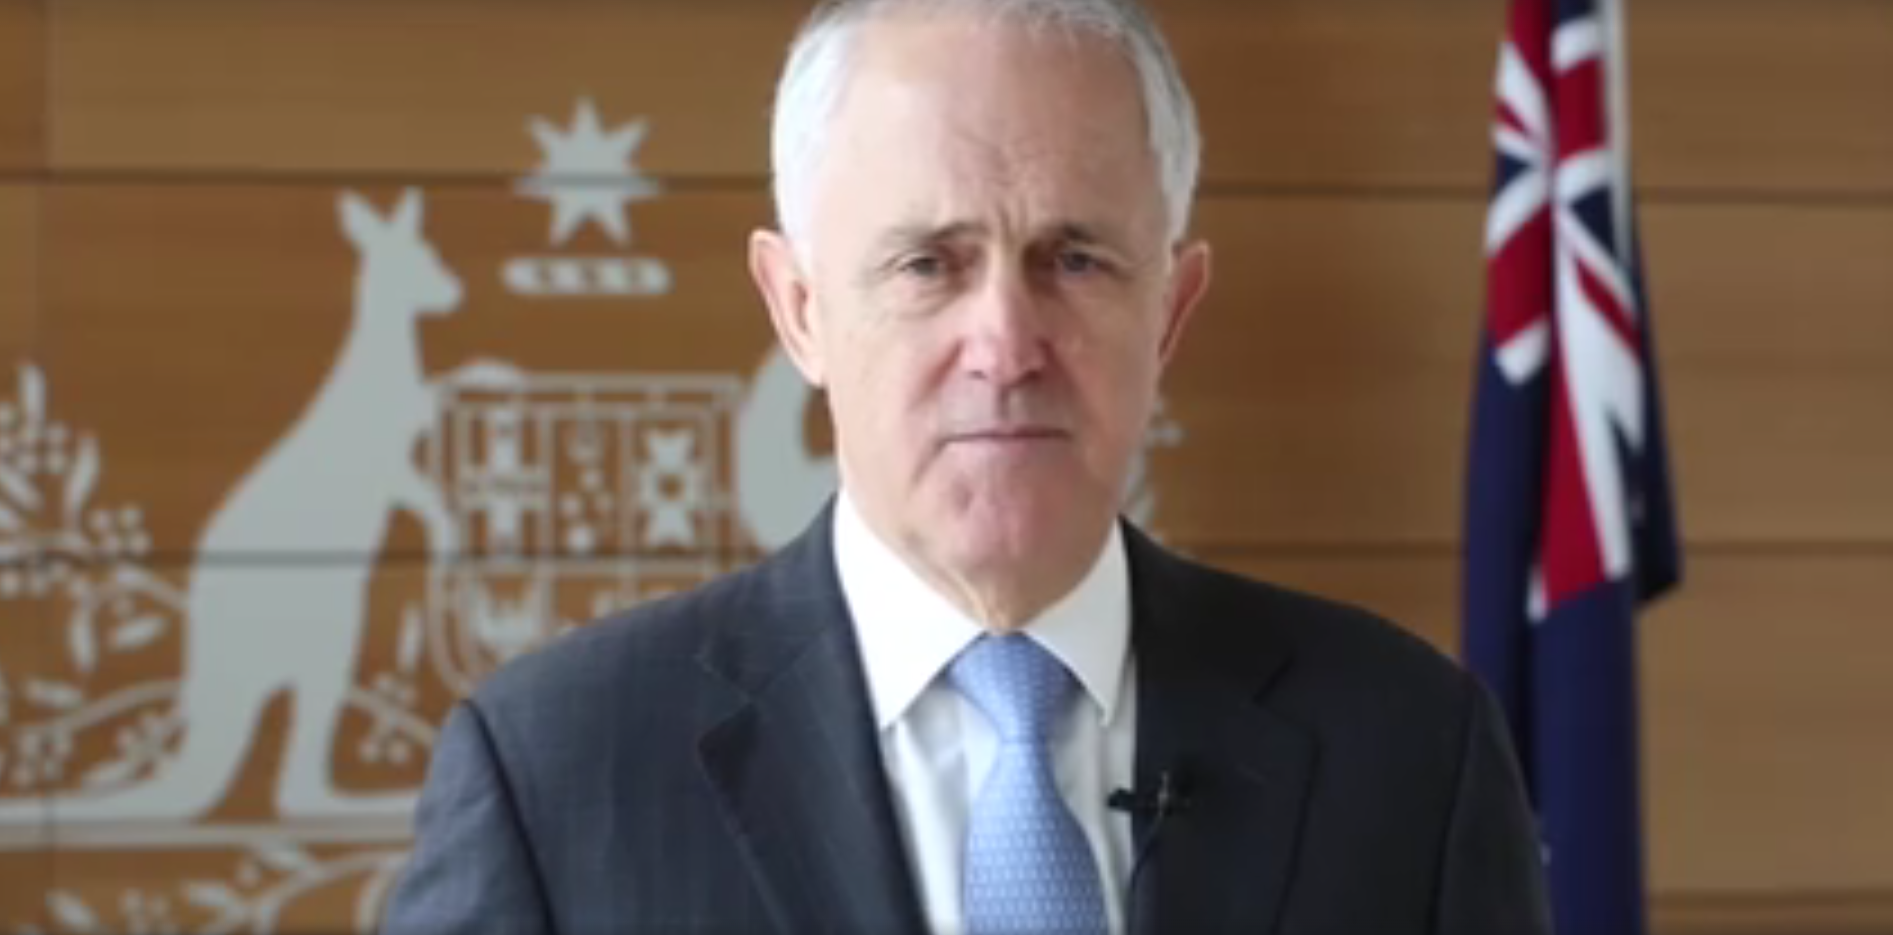 Turnbull calls for separate review of religious freedoms in Australia to clear path for SSM